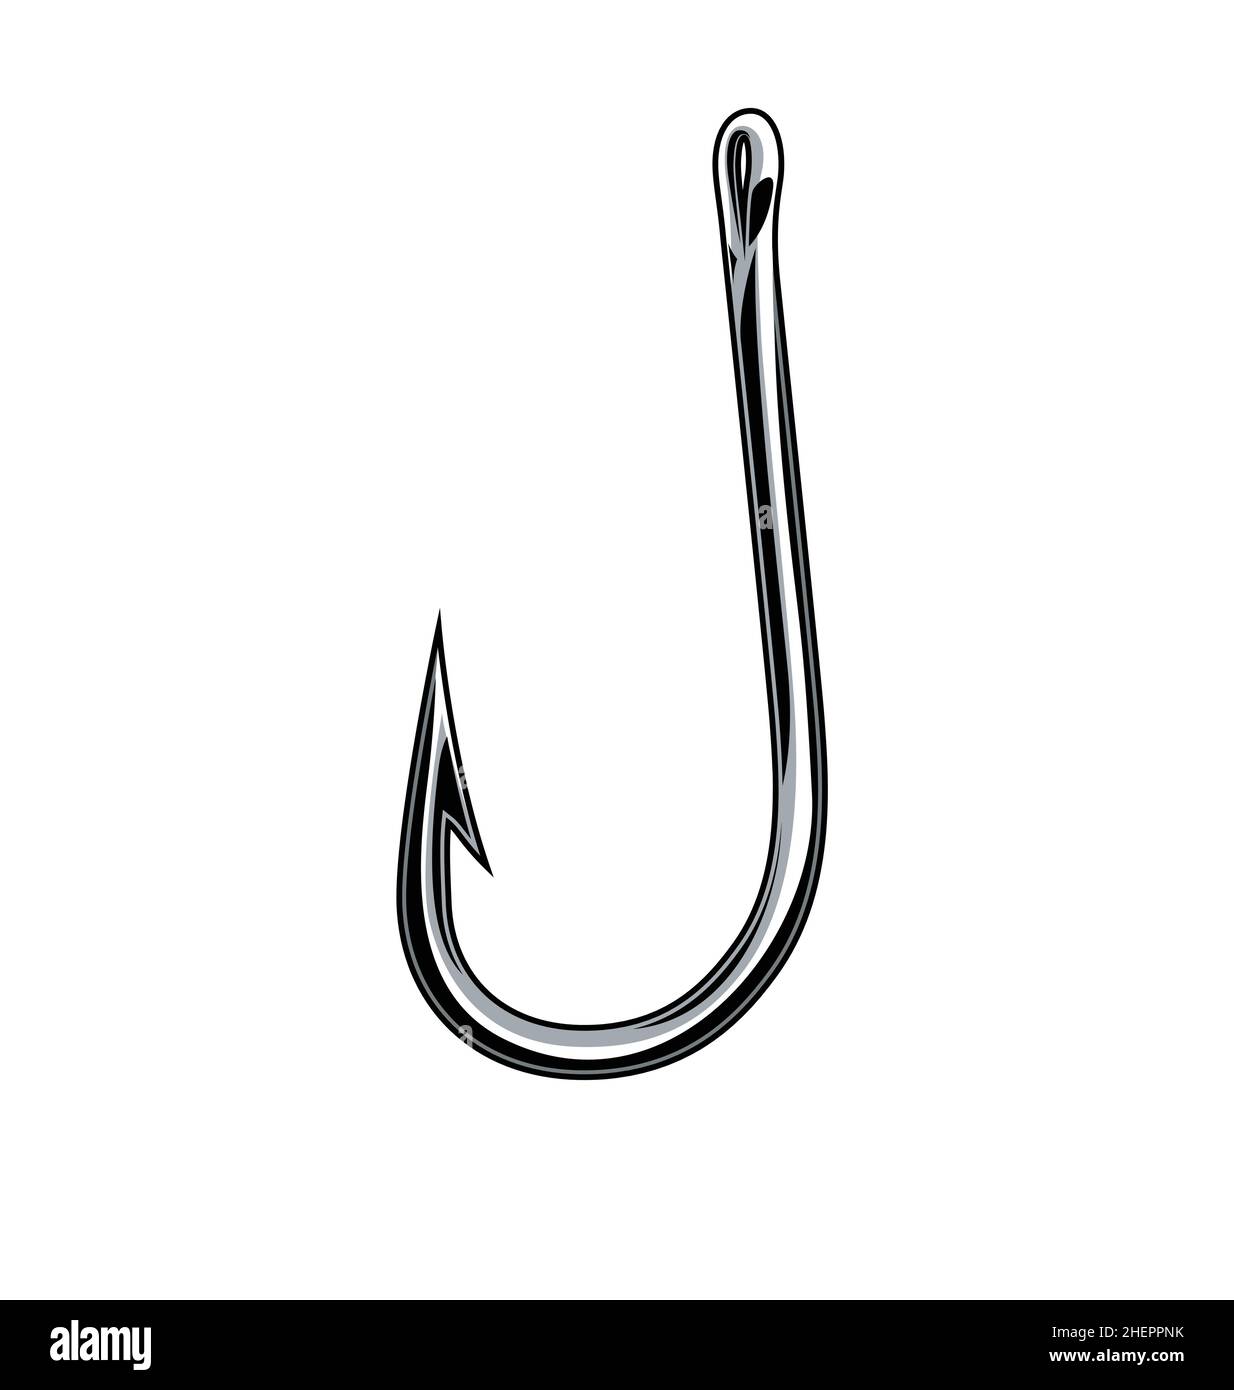 Stainless steel hook Stock Vector Images - Alamy